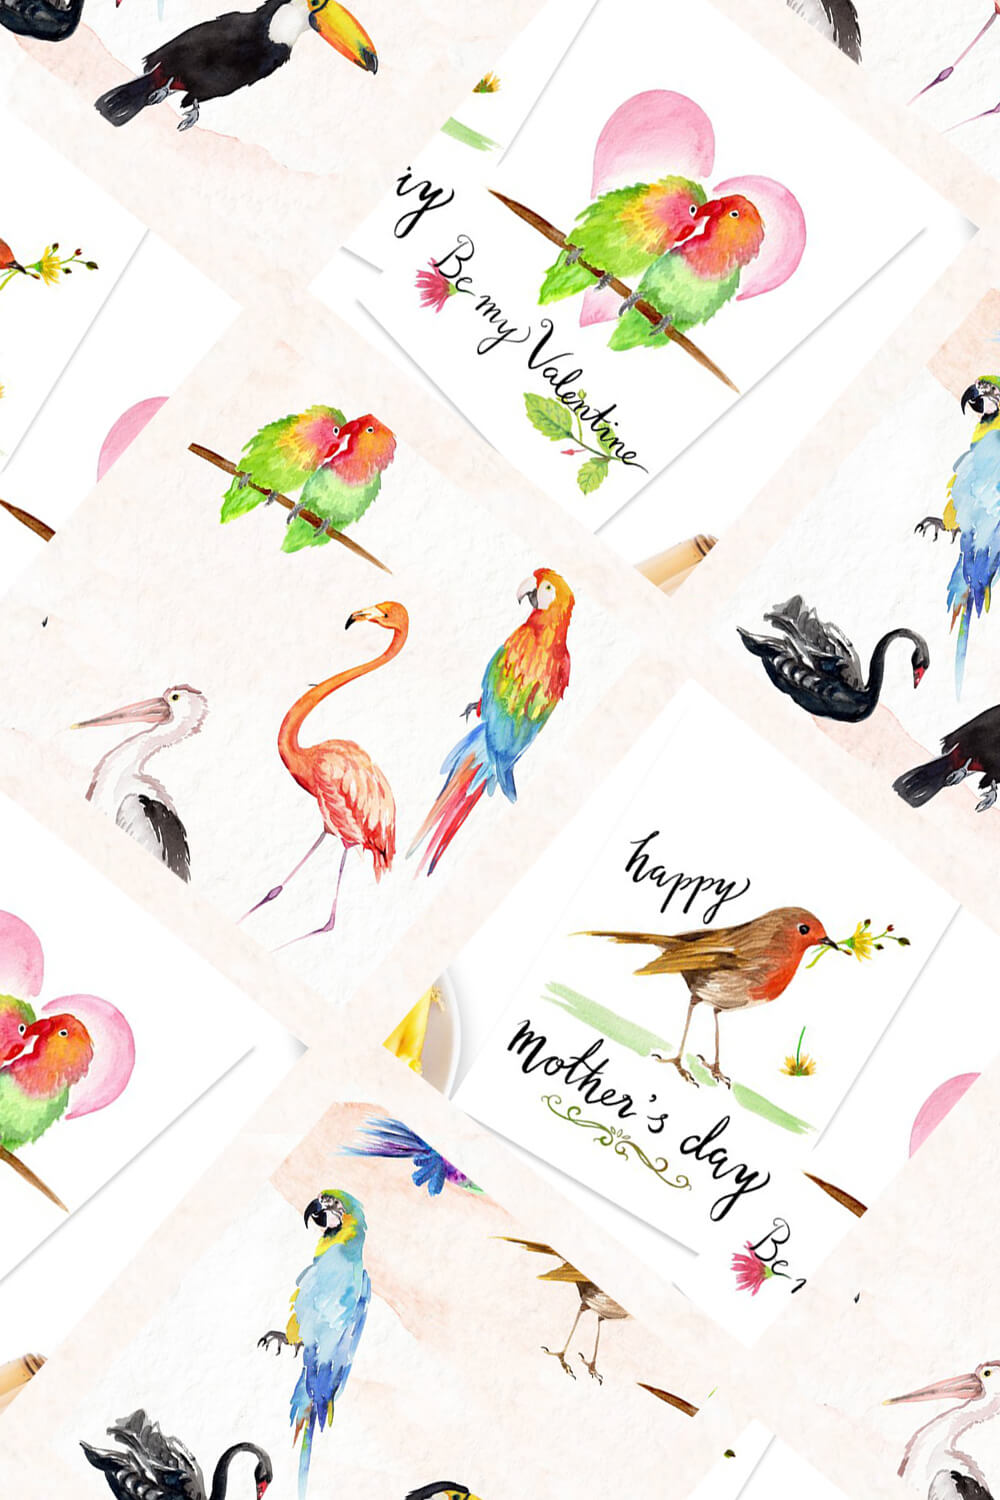 Watercolor images of flamingos, parrots and black swans.